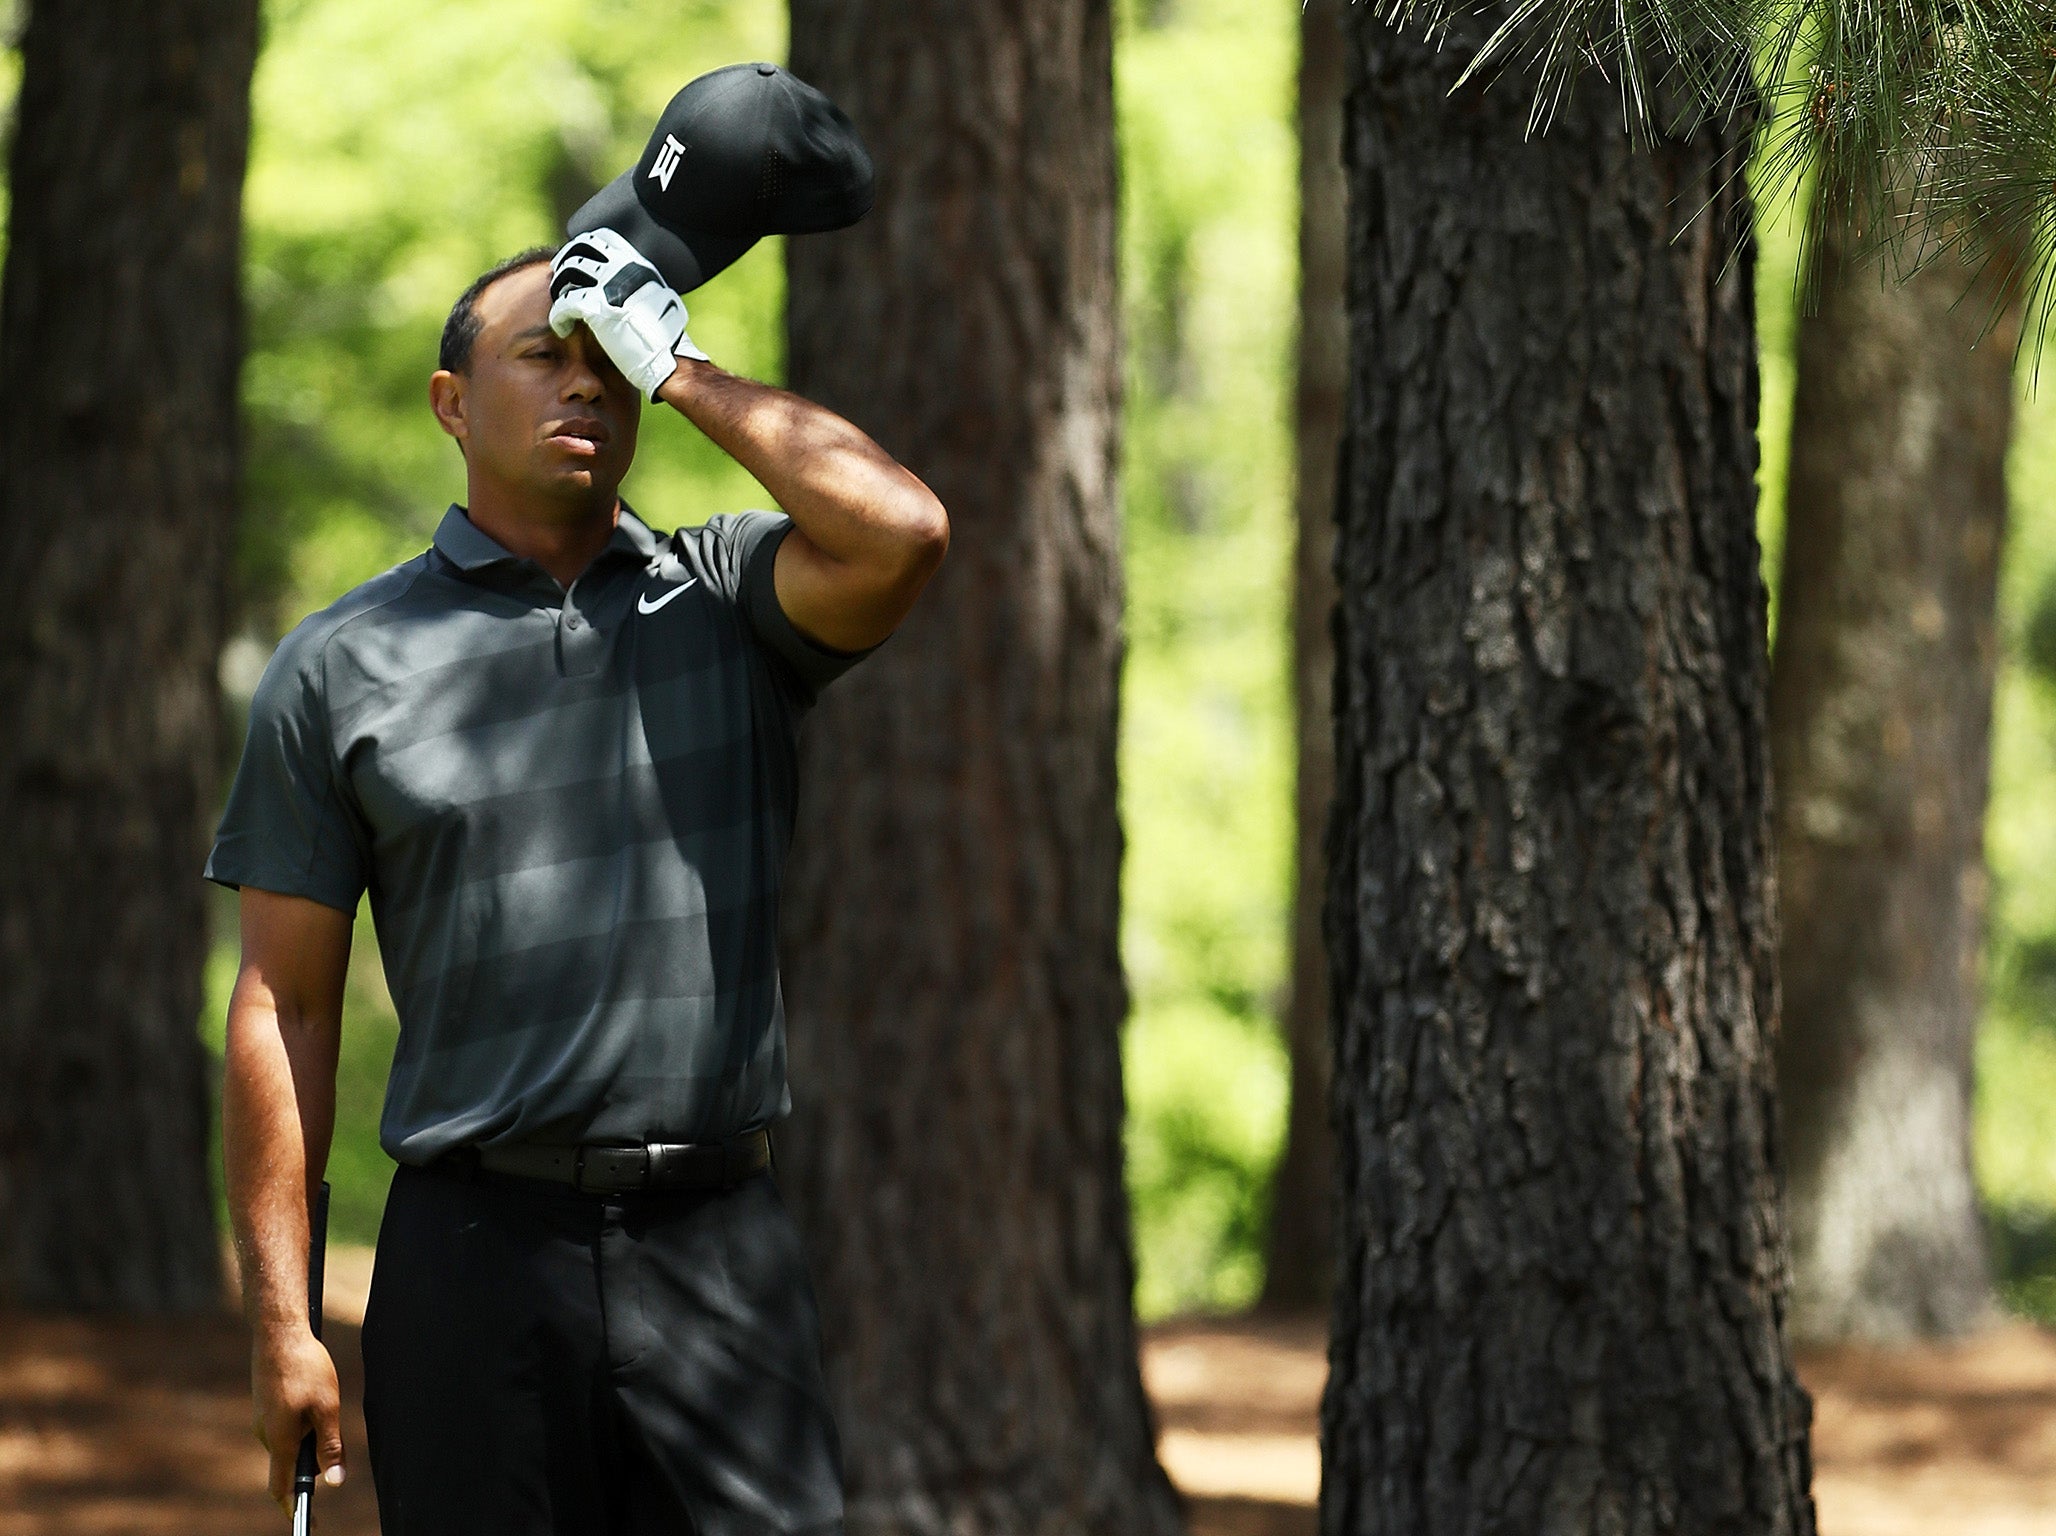 Tiger Woods bogeyed the fourth and fifth after finding sand off the tee